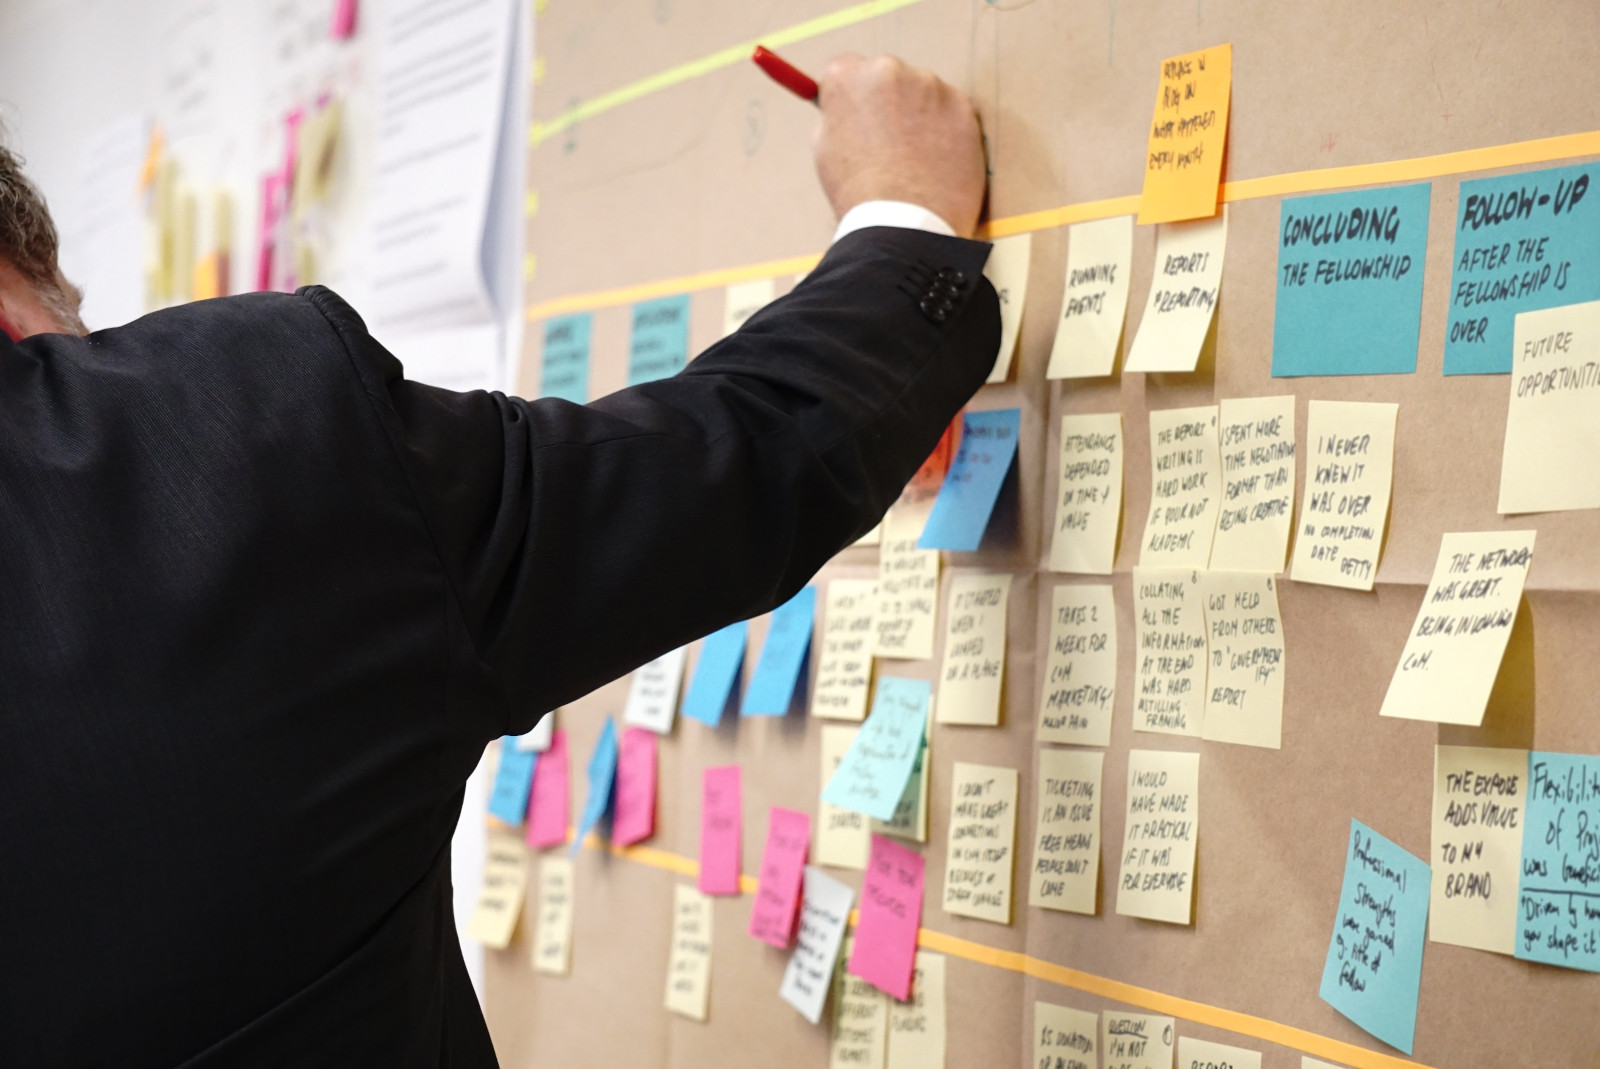 Man writing on project board with post-its